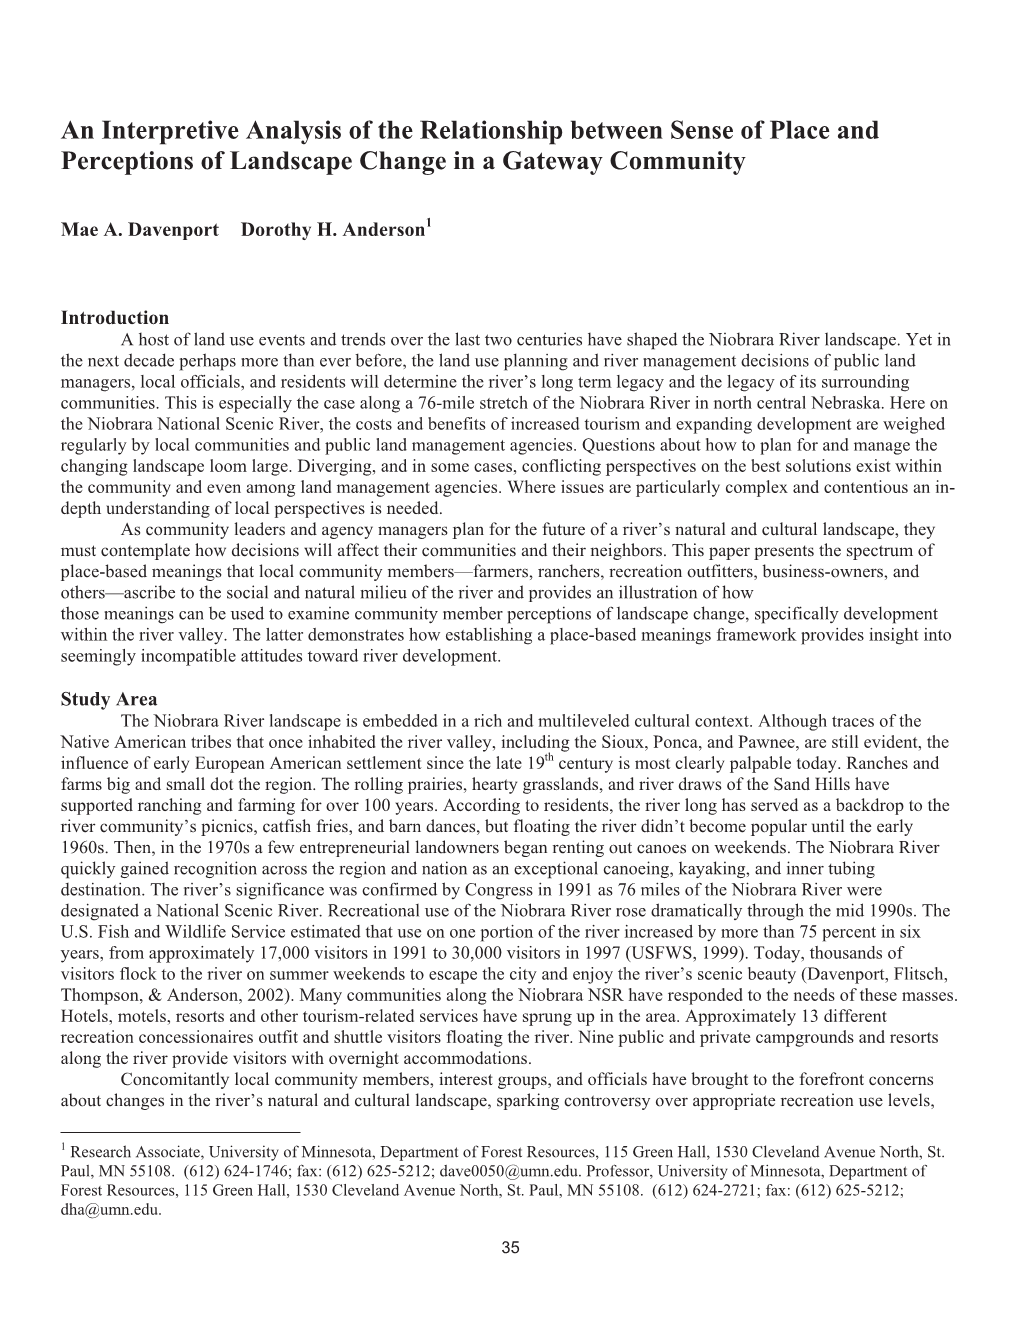 An Interpretive Analysis of the Relationship Between Sense of Place and Perceptions of Landscape Change in a Gateway Community